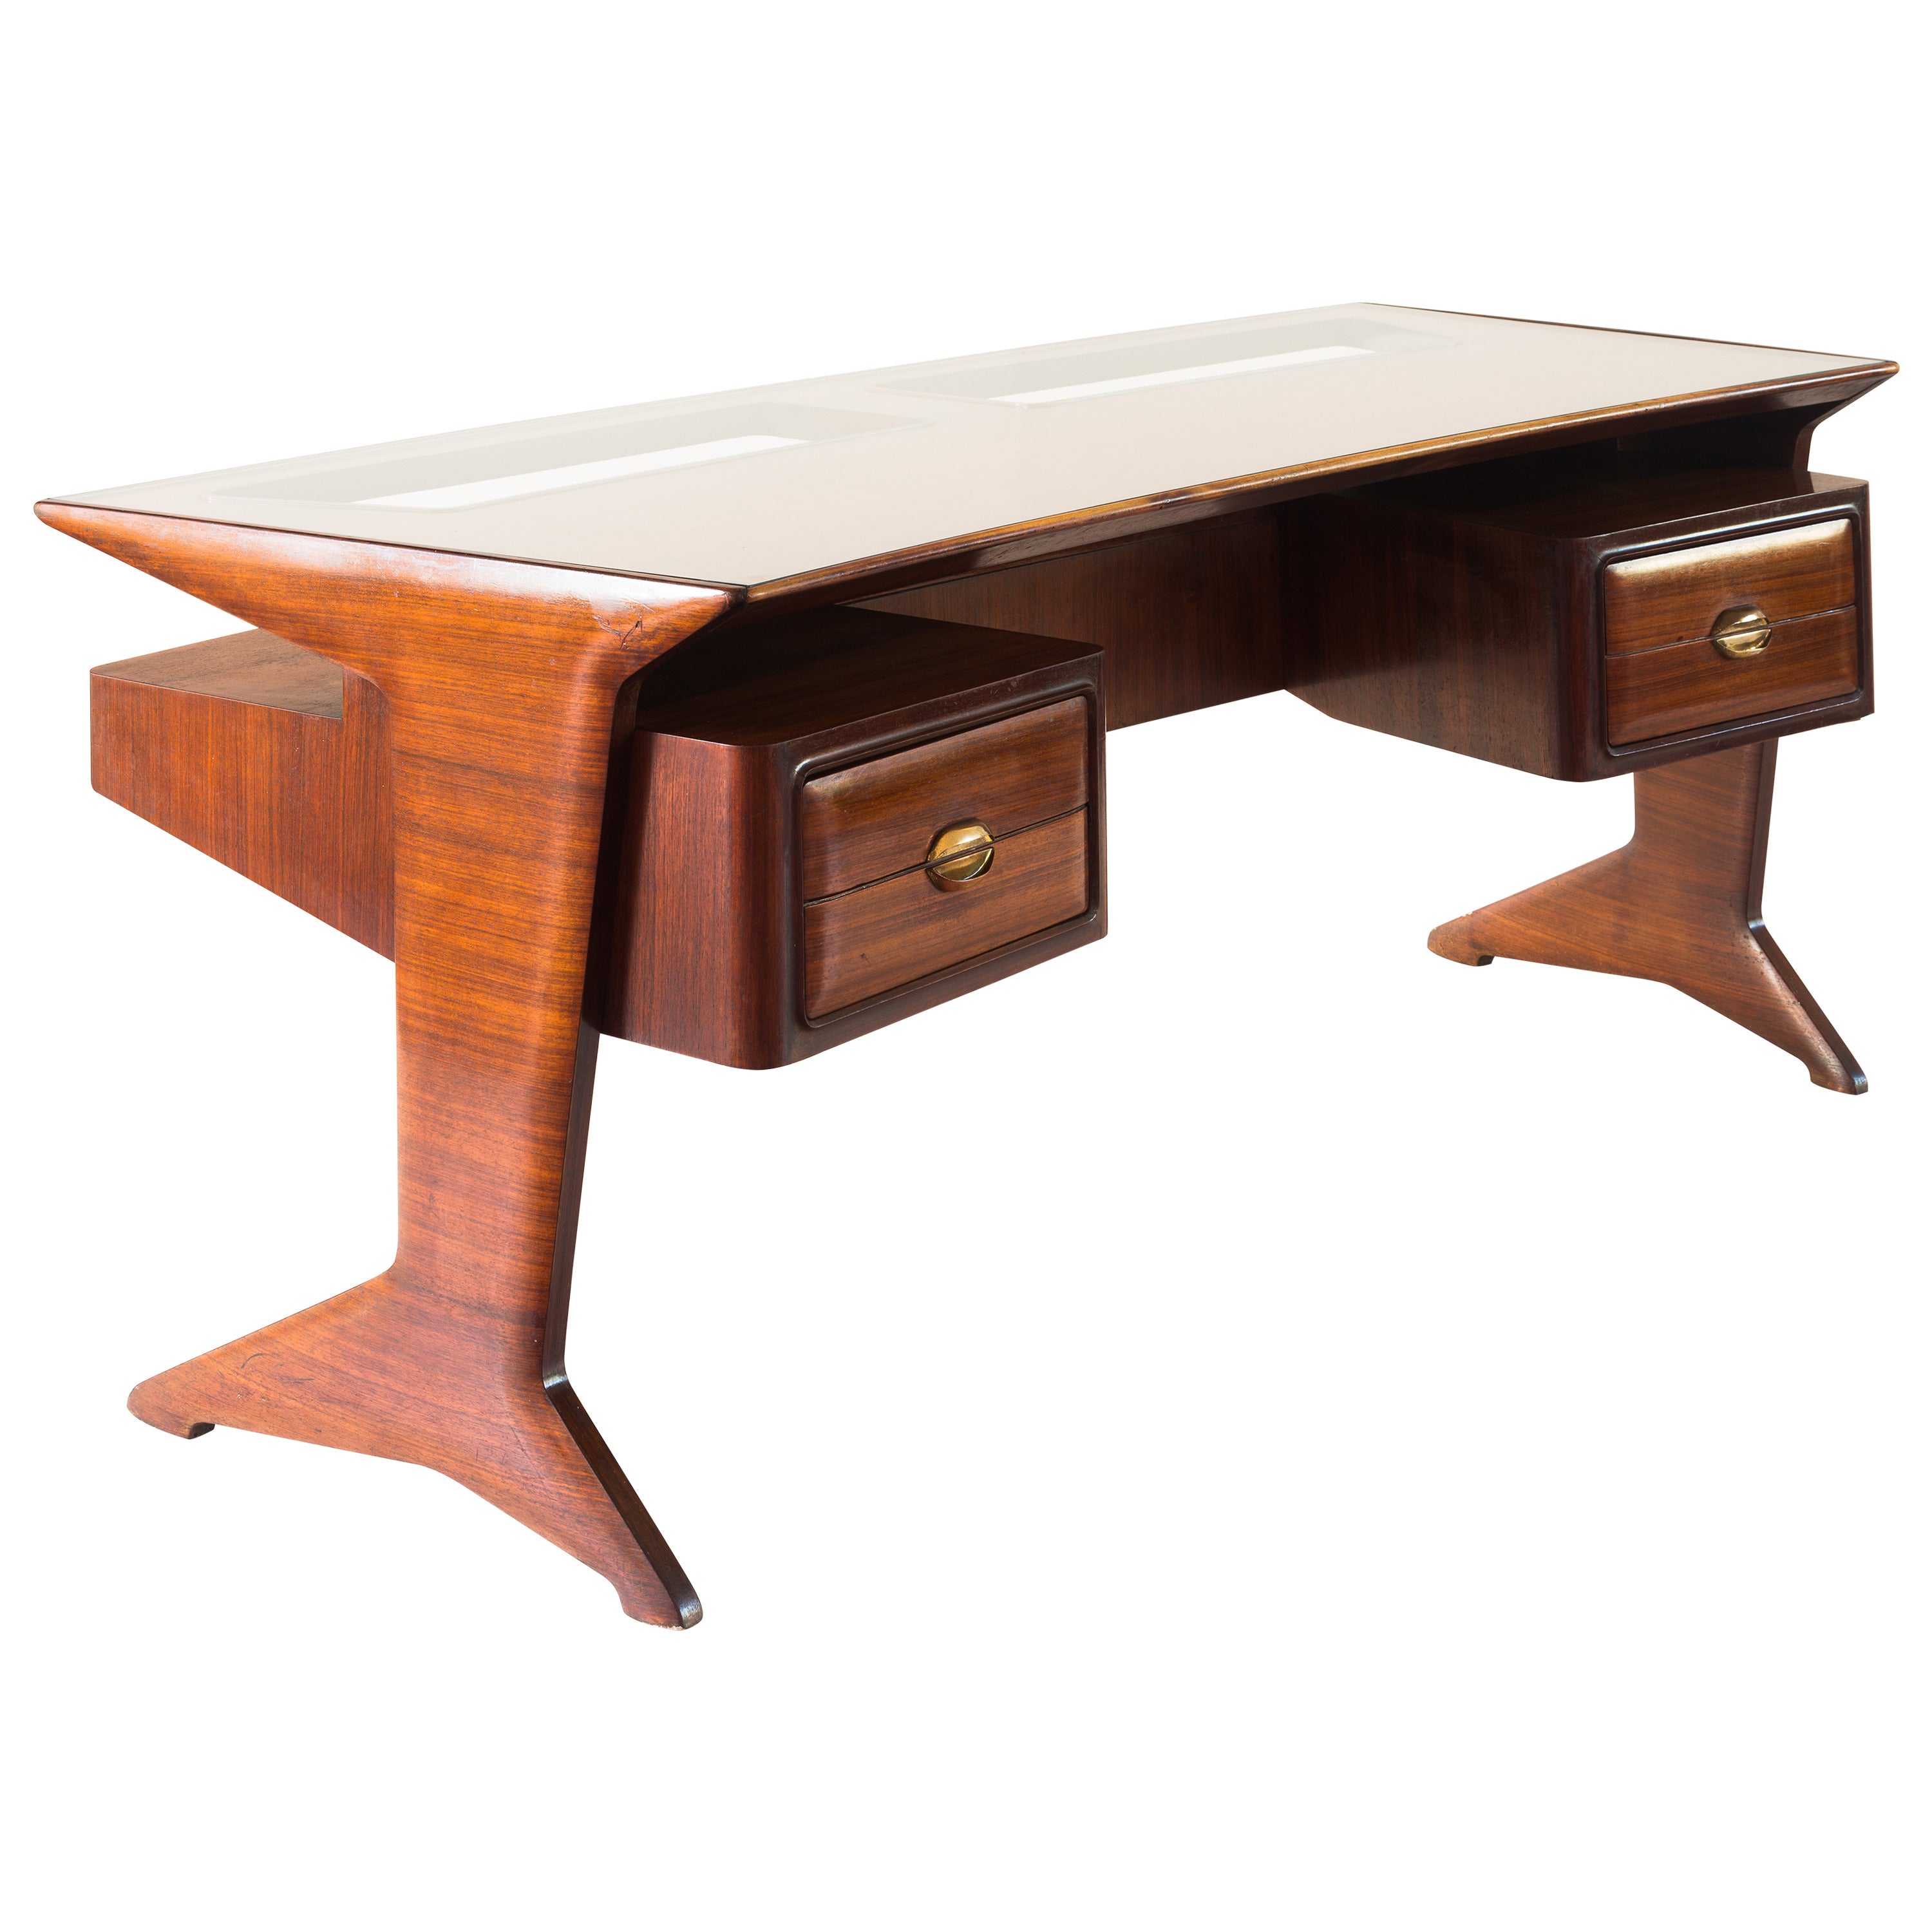 Rare writing desk attributed to Arch Guglielmo Ulrich
aerodynamics line, original curved top with two windows
four drawers, original bronze handles shaped mouth
rosewood, brass, glass. Important Italian design iconic piece. 

Very good original